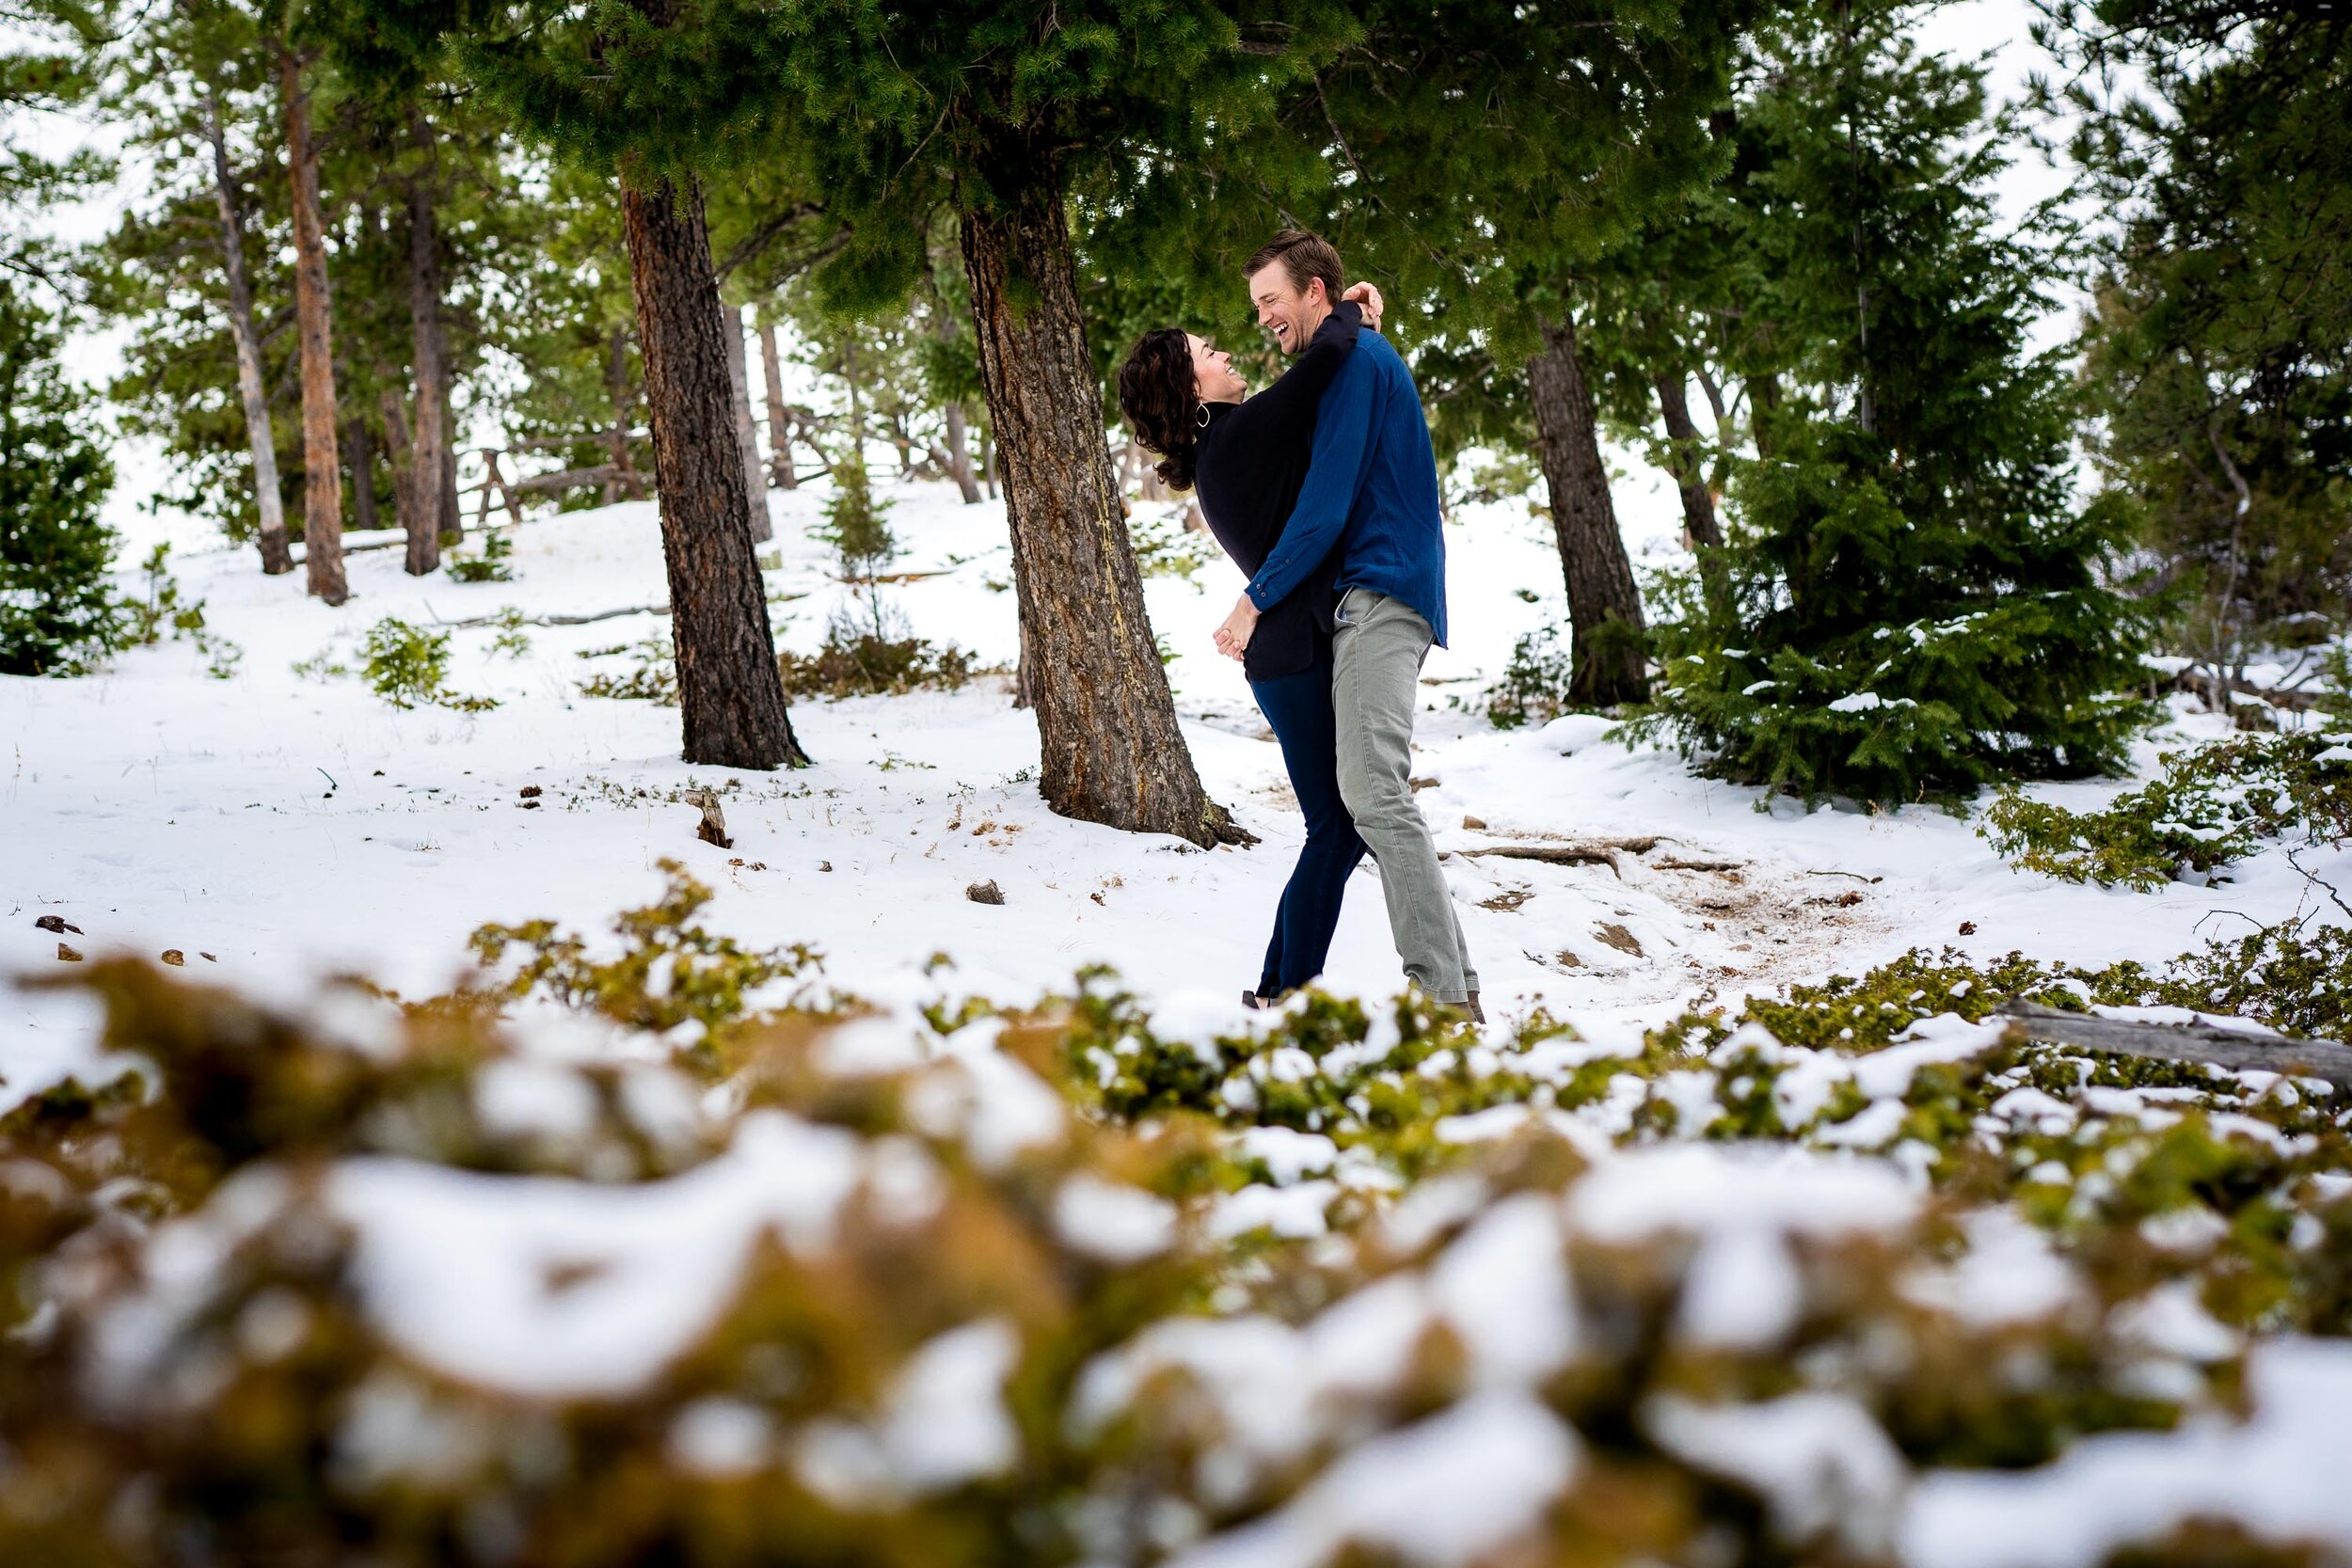 Engaged couple embraces in the snow in a dense evergreen mountain forest, Engagement Session, Engagement Photos, Engagement Photos Inspiration, Engagement Photography, Engagement Photographer, Winter Engagement Photos, Mountain Engagement Photos, Lost Gulch Overlook engagement session, Lost Gulch Overlook engagement photos, Lost Gulch Overlook engagement photography, Lost Gulch Overlook engagement photographer, Lost Gulch Overlook  engagement inspiration, Boulder engagement session, Boulder engagement photos, Boulder engagement photography, Boulder engagement photographer, Boulder engagement inspiration, Colorado engagement session, Colorado engagement photos, Colorado engagement photography, Colorado engagement photographer, Colorado engagement inspiration